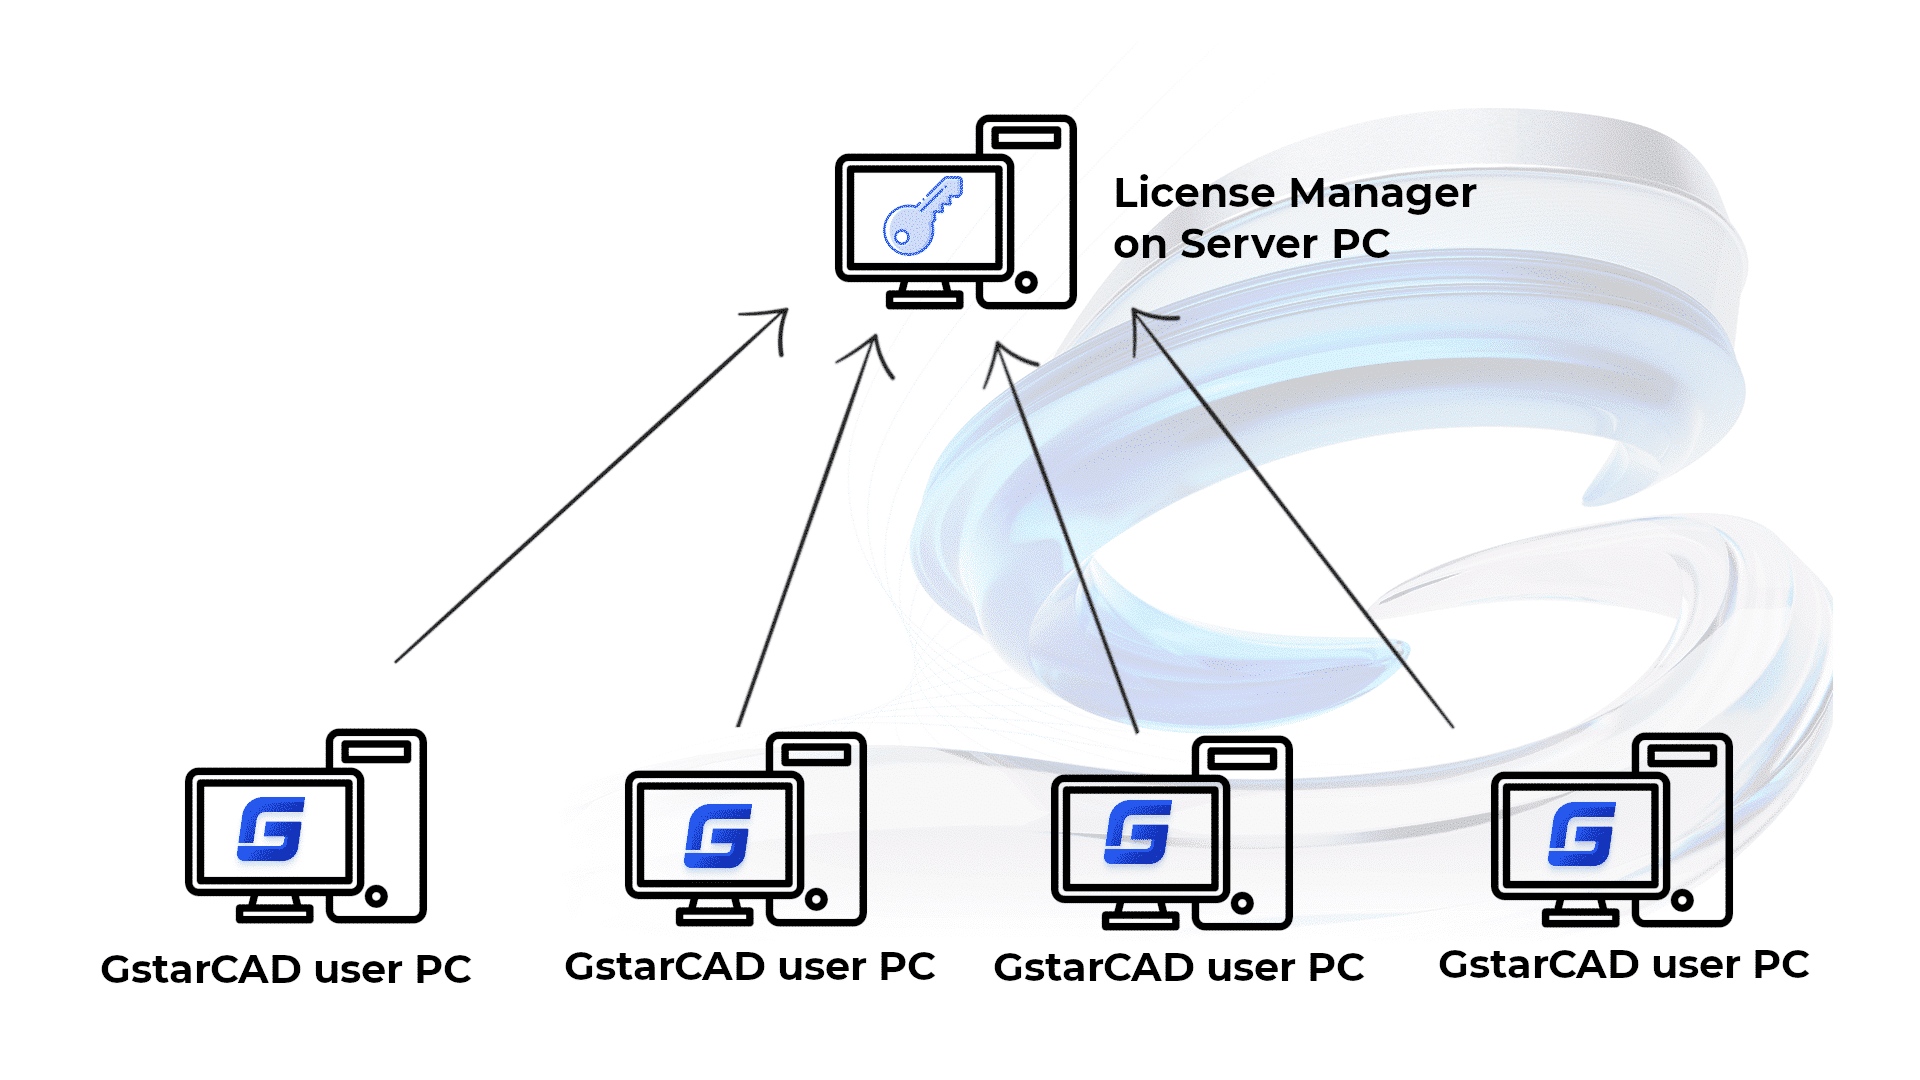 Gstarcad Network License - Is It For You?